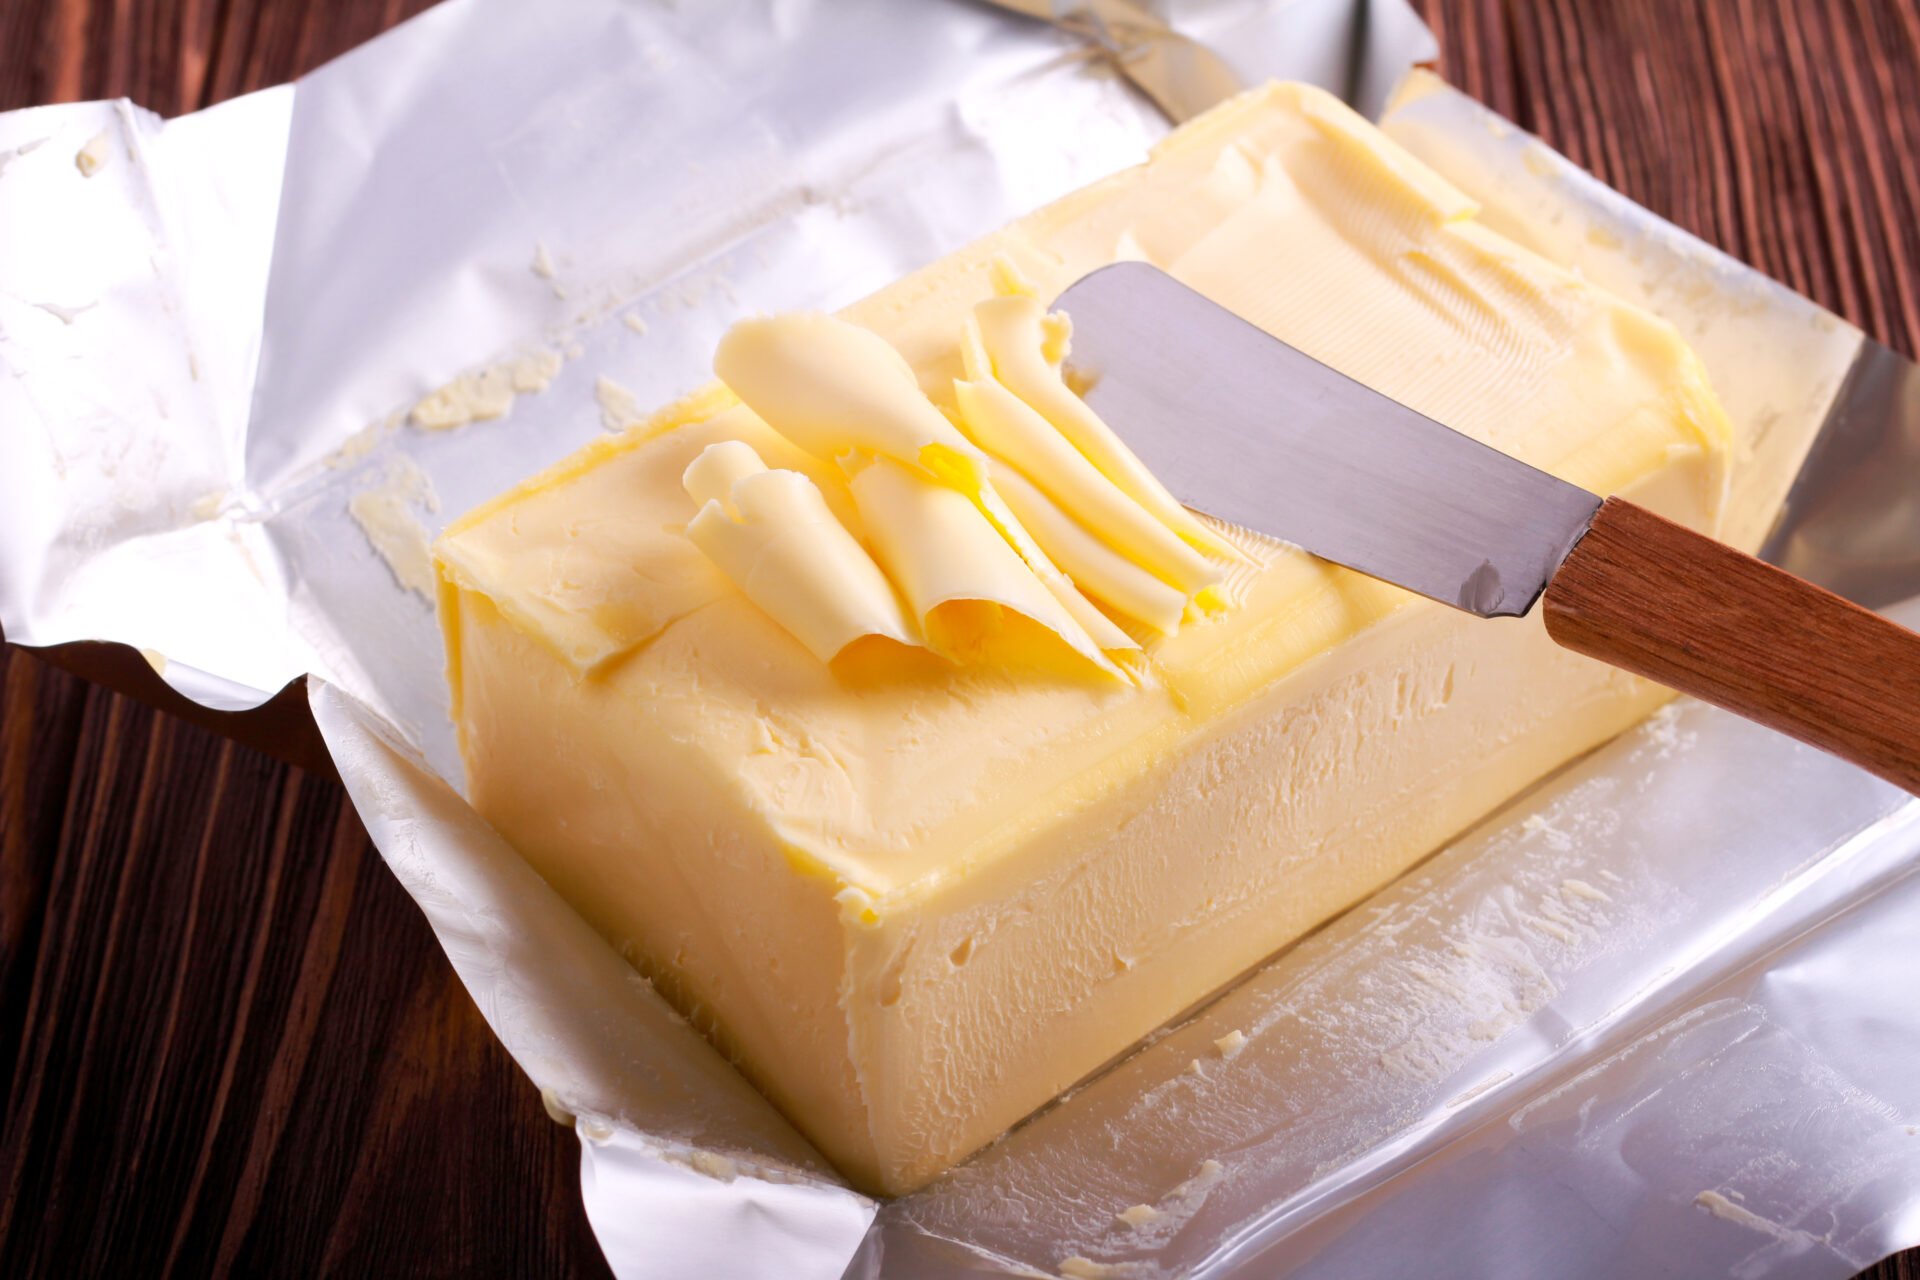 Butter Wrappers & Indications of PFAS "Forever Chemicals" -- Buying Guide 3